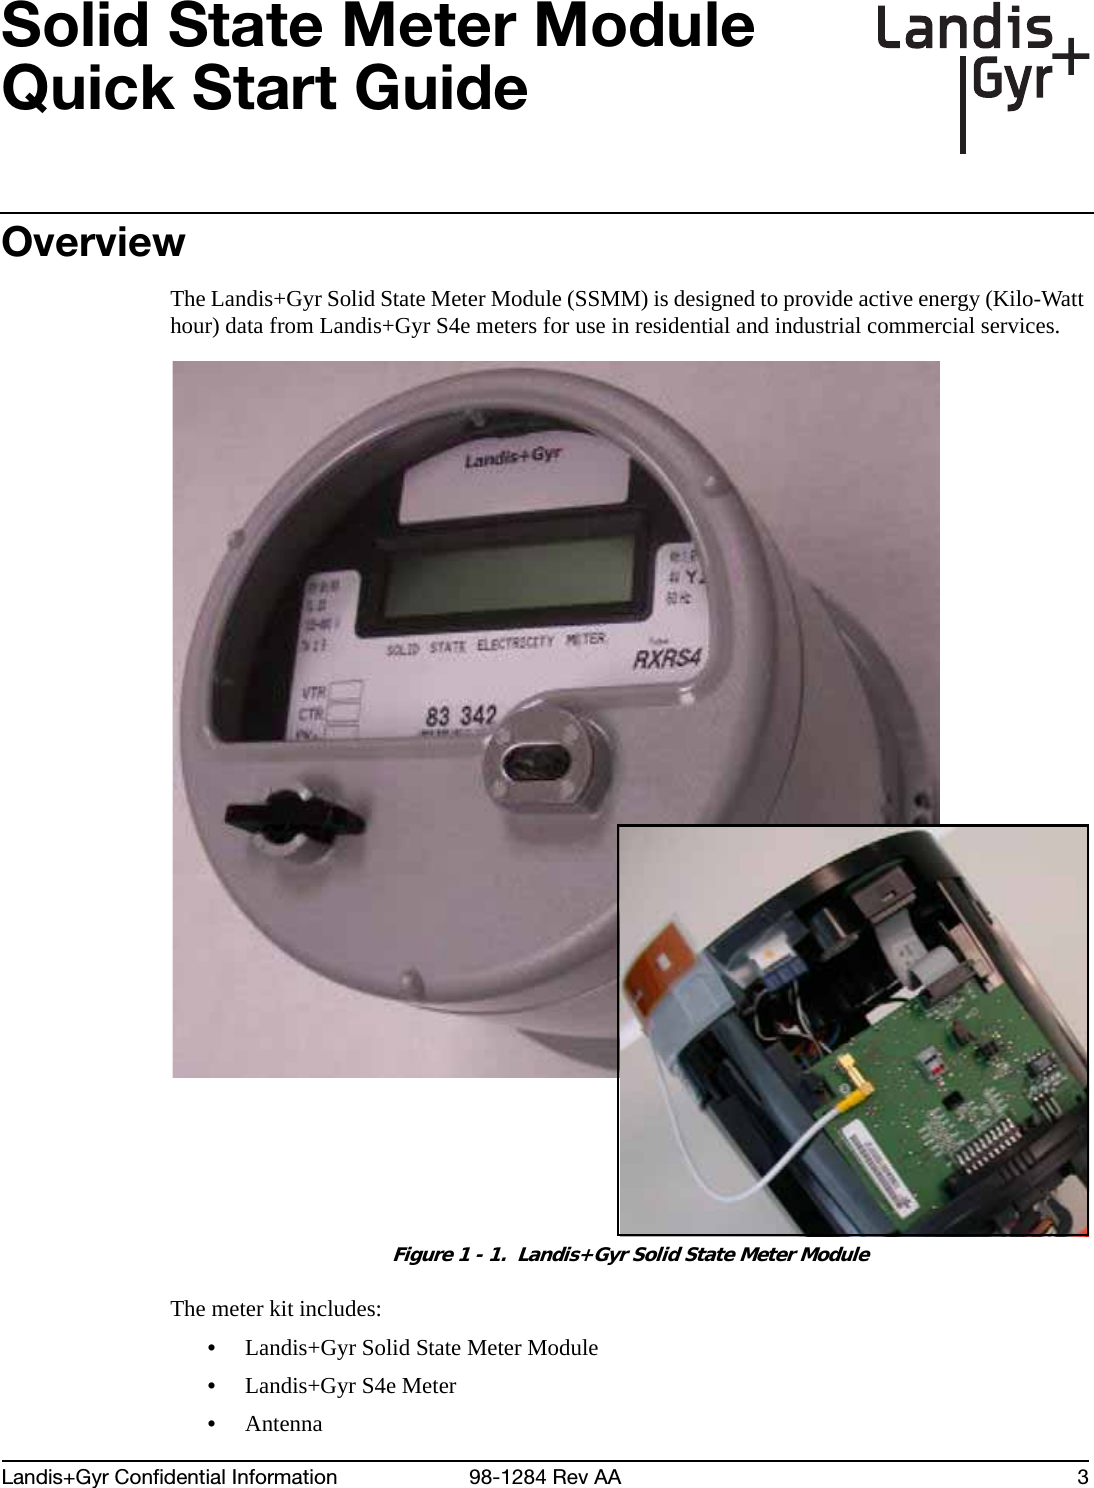 Draft 12/7/2012Landis+Gyr Confidential Information 98-1284 Rev AA 3Solid State Meter Module Quick Start GuideOverviewThe Landis+Gyr Solid State Meter Module (SSMM) is designed to provide active energy (Kilo-Watt hour) data from Landis+Gyr S4e meters for use in residential and industrial commercial services. Figure 1 - 1.  Landis+Gyr Solid State Meter ModuleThe meter kit includes:•Landis+Gyr Solid State Meter Module•Landis+Gyr S4e Meter•Antenna